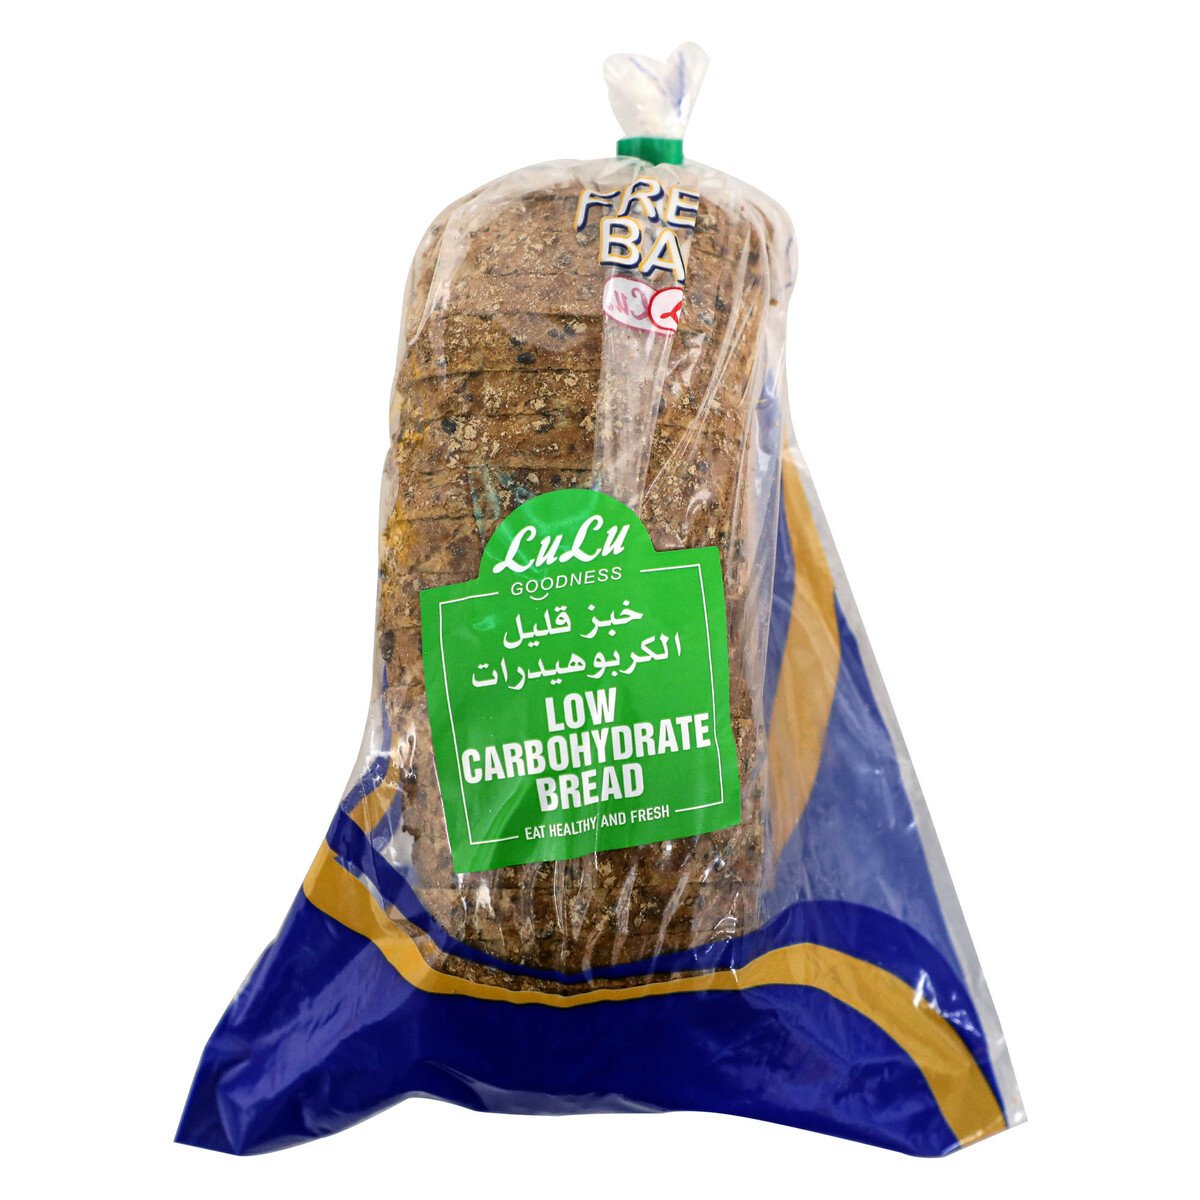 LuLu Low Carbohydrate Bread 1pkt